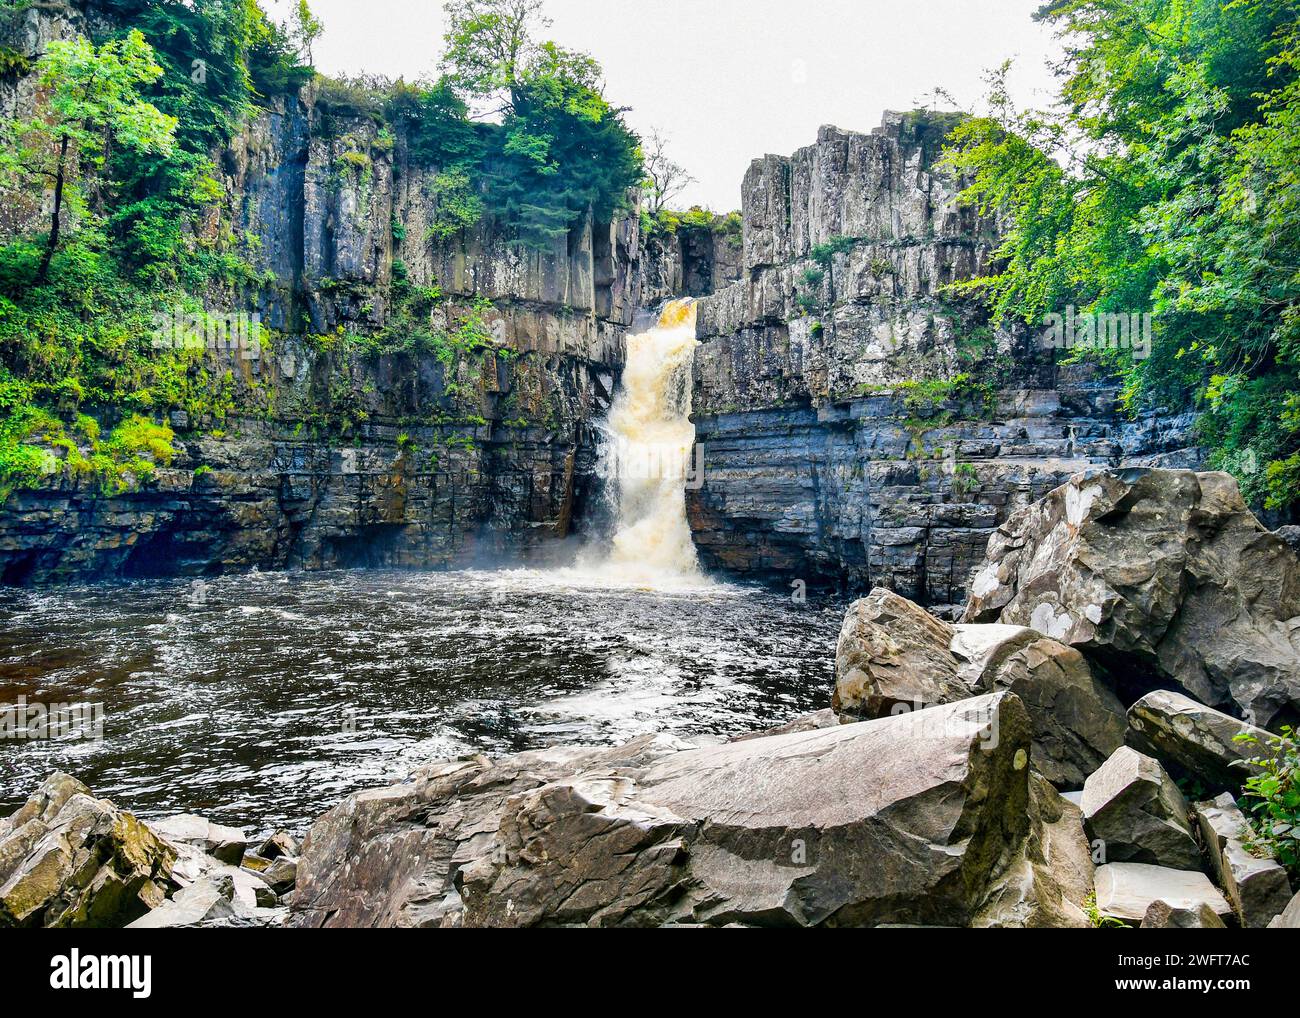 High Force Waterfall on the River Tees, near Middleton-in-Teesdale, Teesdale, County Durham, England, UK Stock Photo